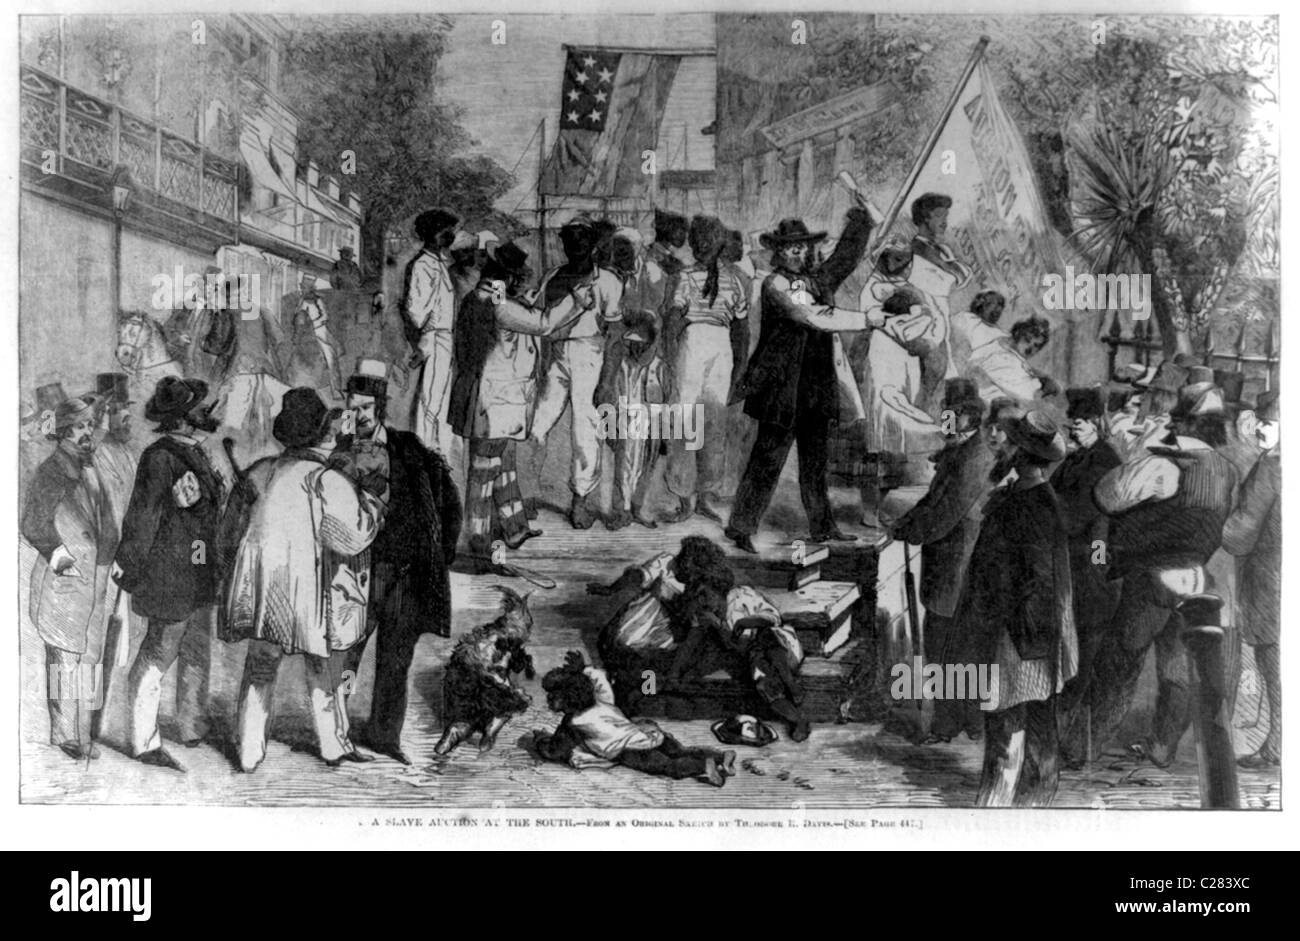 A slave auction at the south.  African American men, women, and children being auctioned off in front of crowd of men. Stock Photo